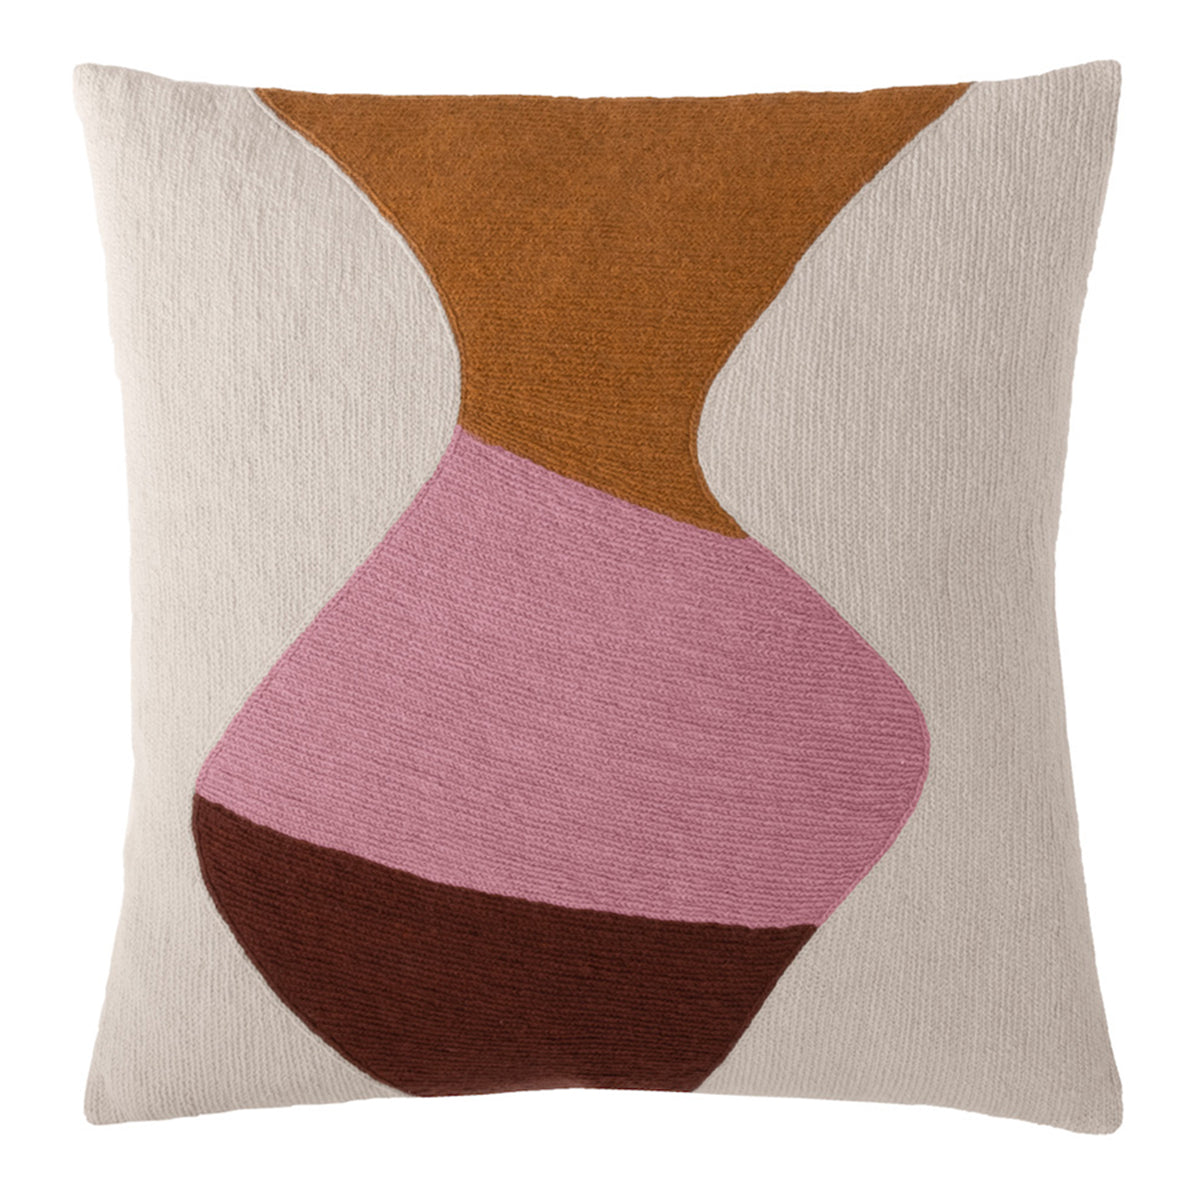 Judy Ross Totem 18" Embroidered Pillow - Oyster/Amber/Dusty Pink/ Sierra